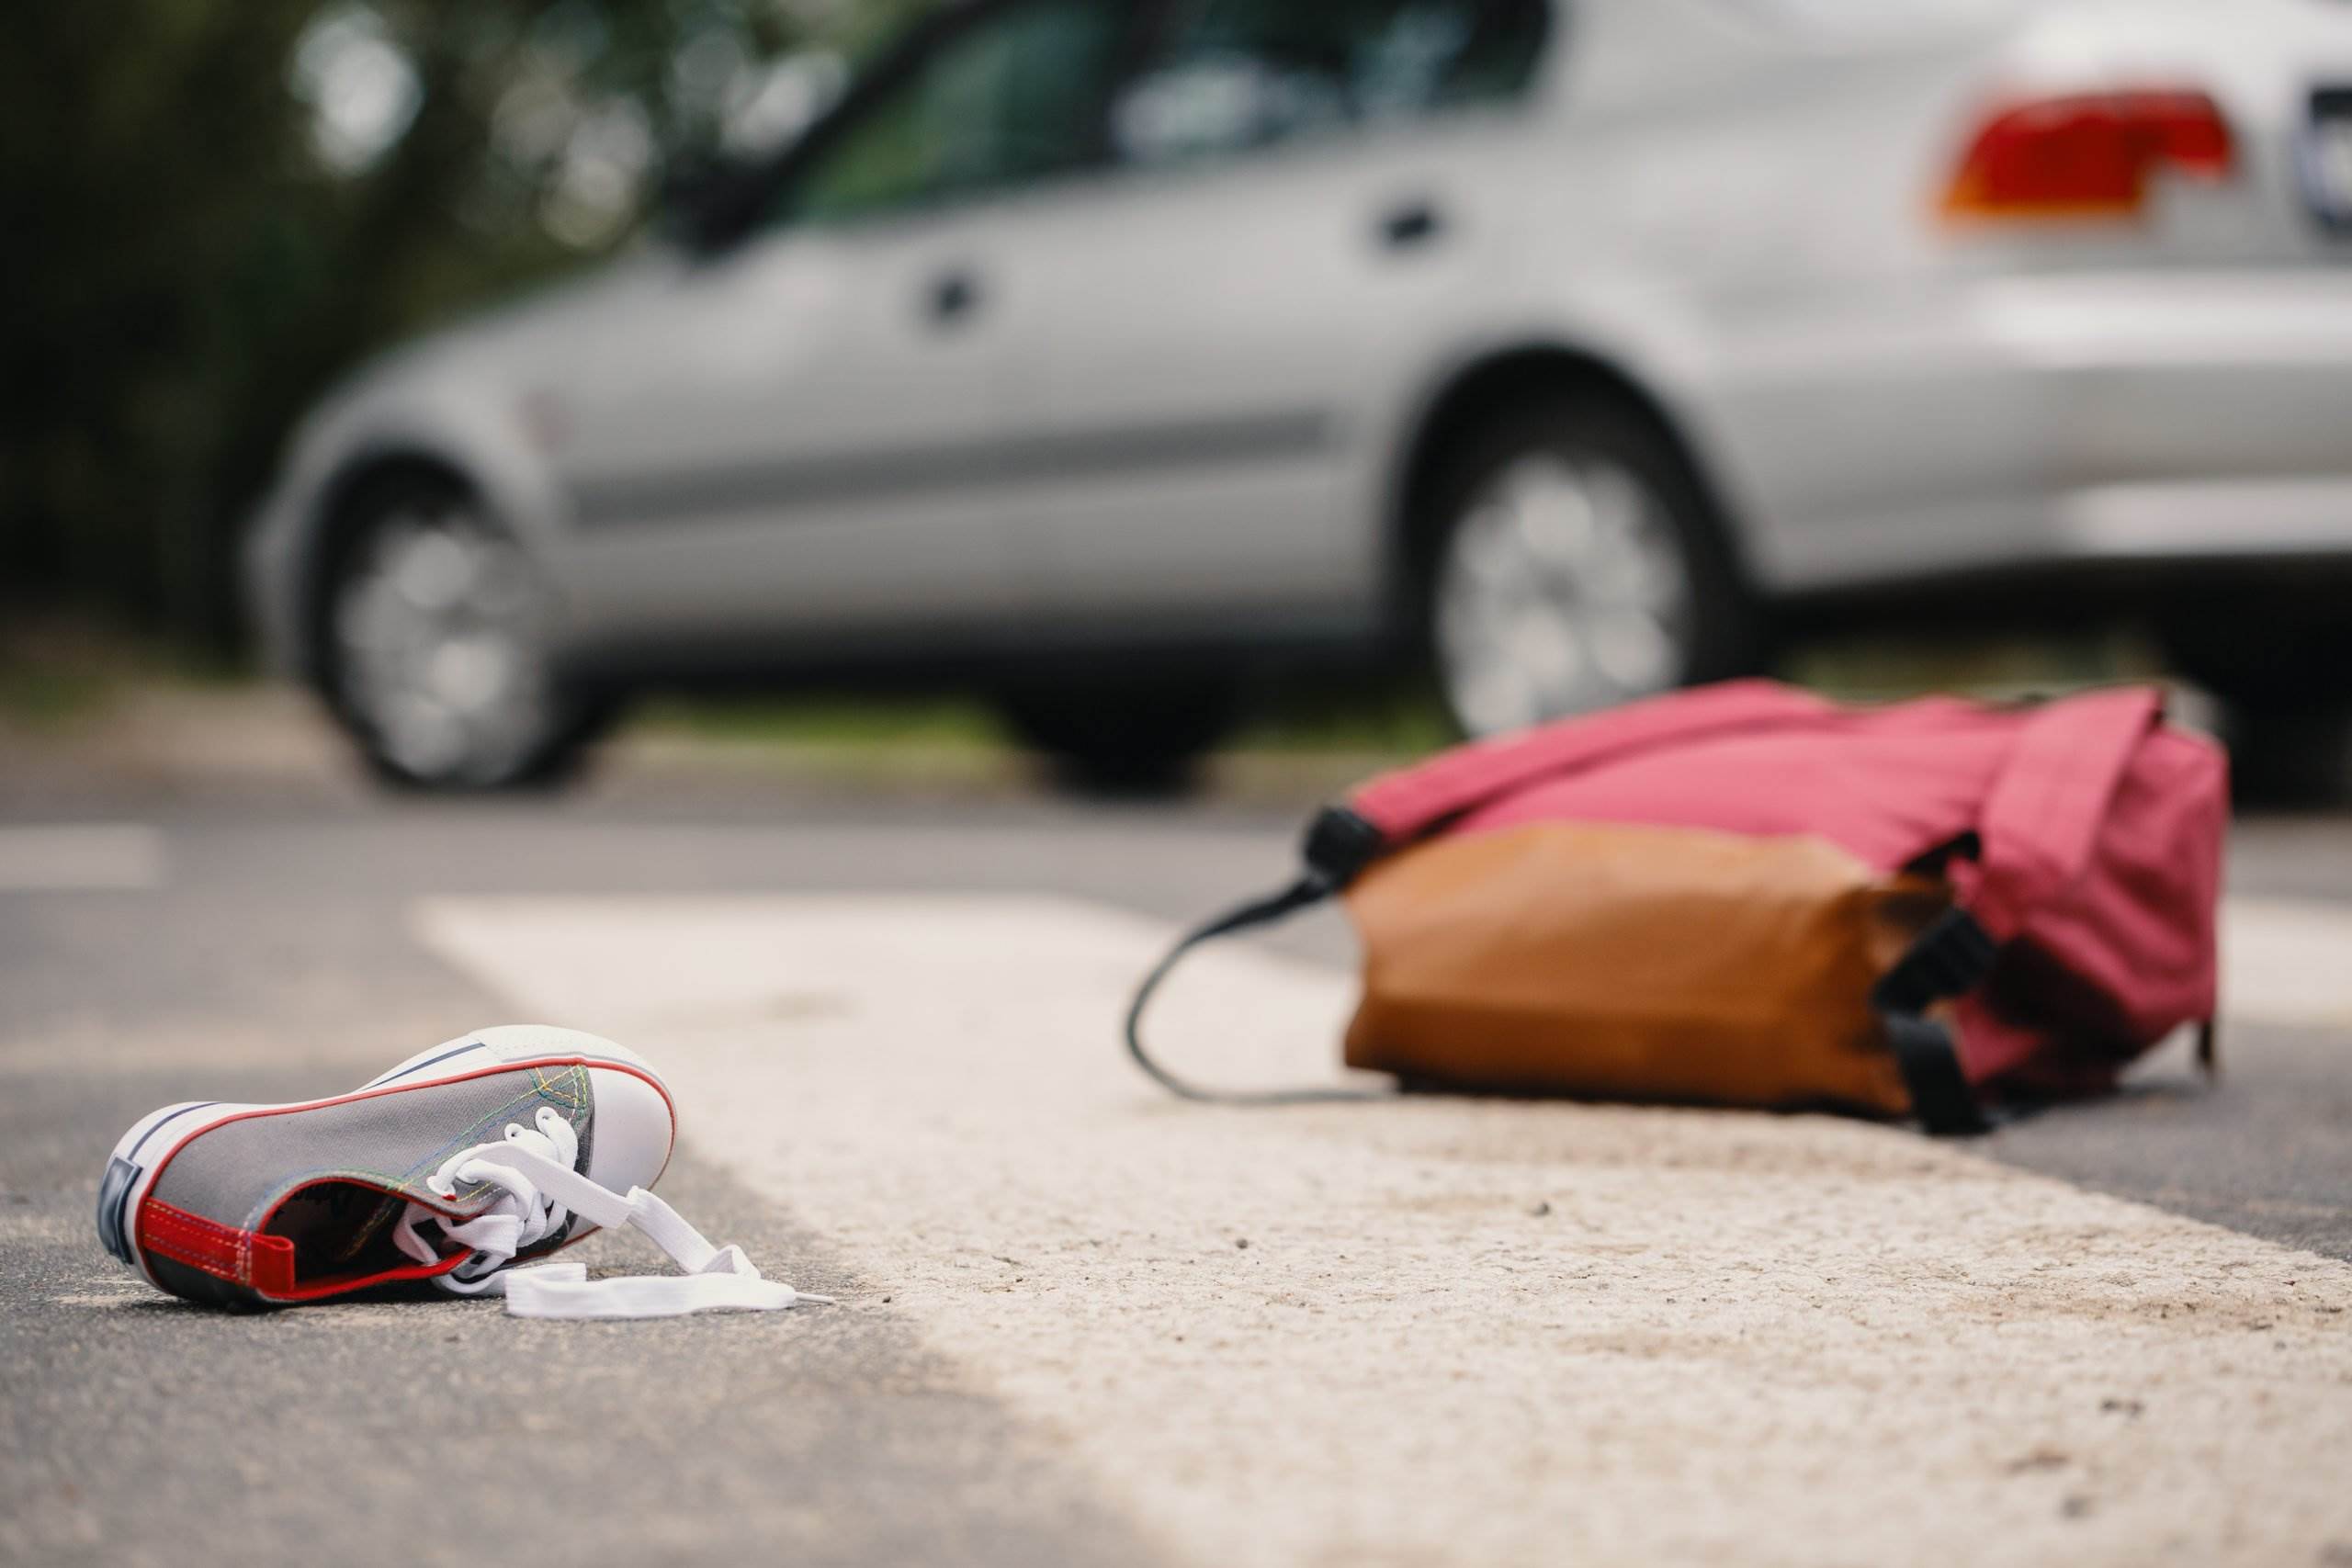 A shoe and a backpack on the ground indicating a pedestrian accident - our Los Angeles pedestrian accident lawyers help victims to sue for compensation